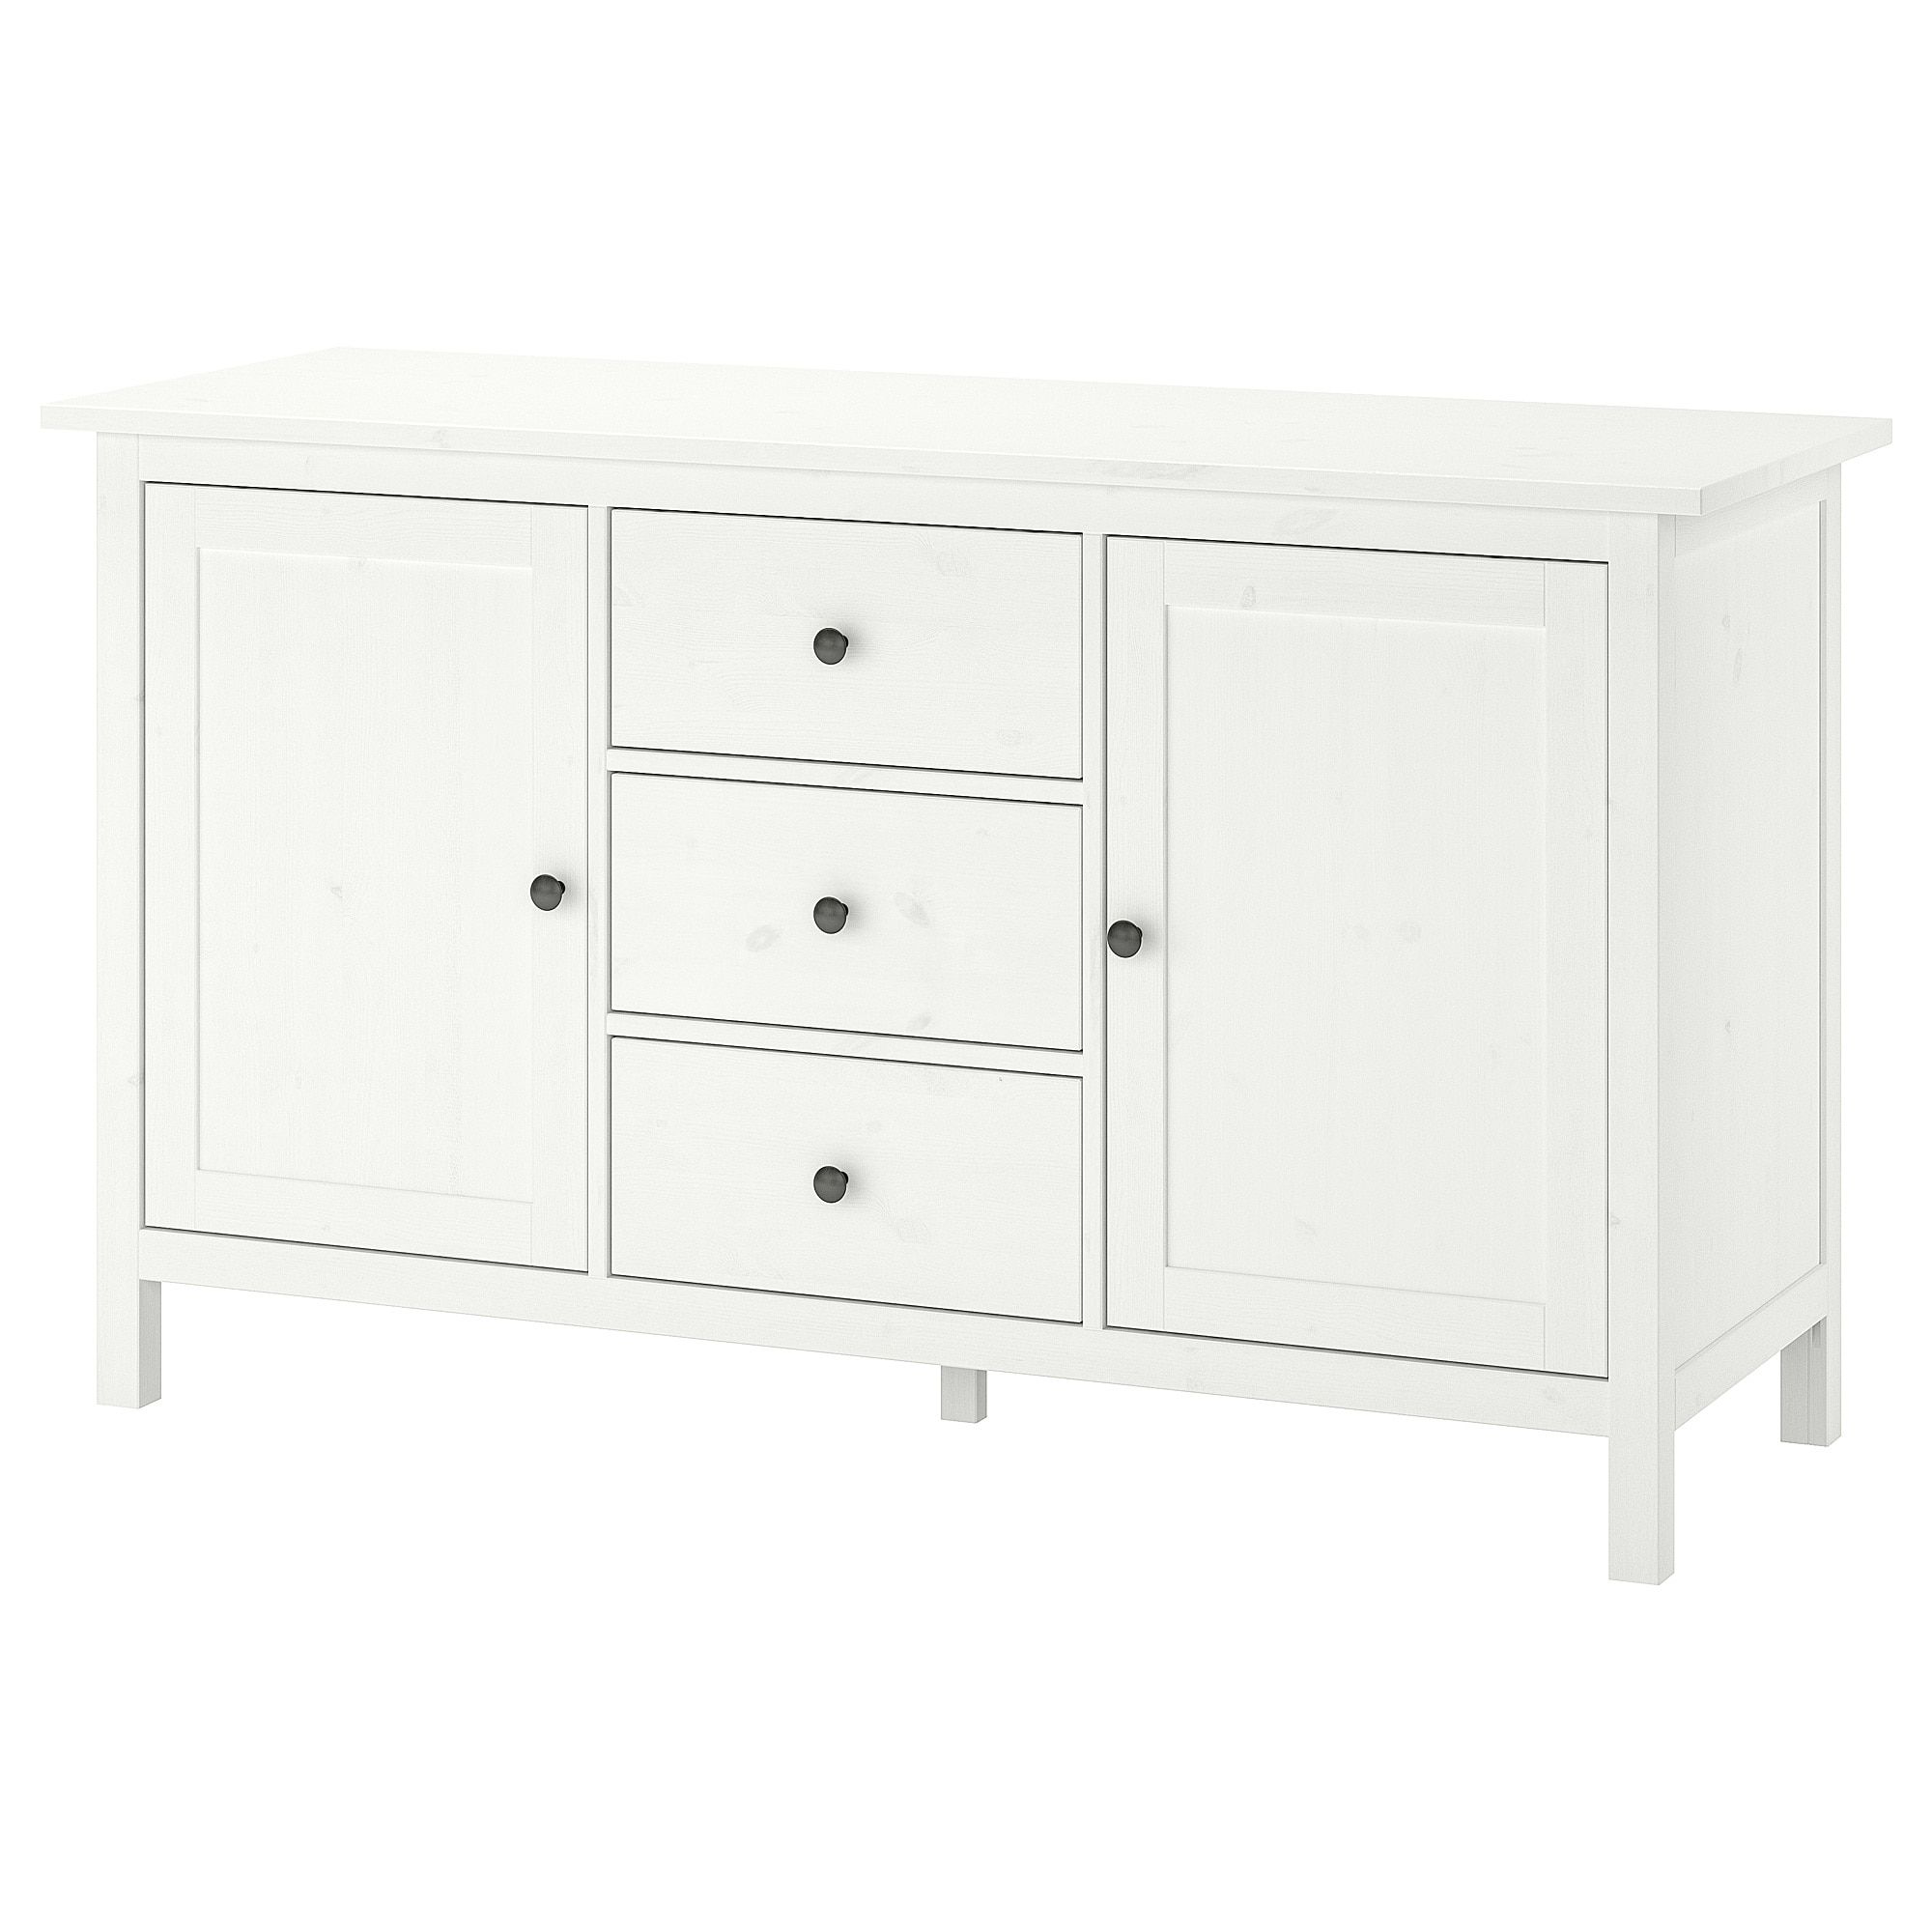 Sideboards & Buffet Cabinets | Ikea With Regard To Satin Black & Painted White Sideboards (View 15 of 30)